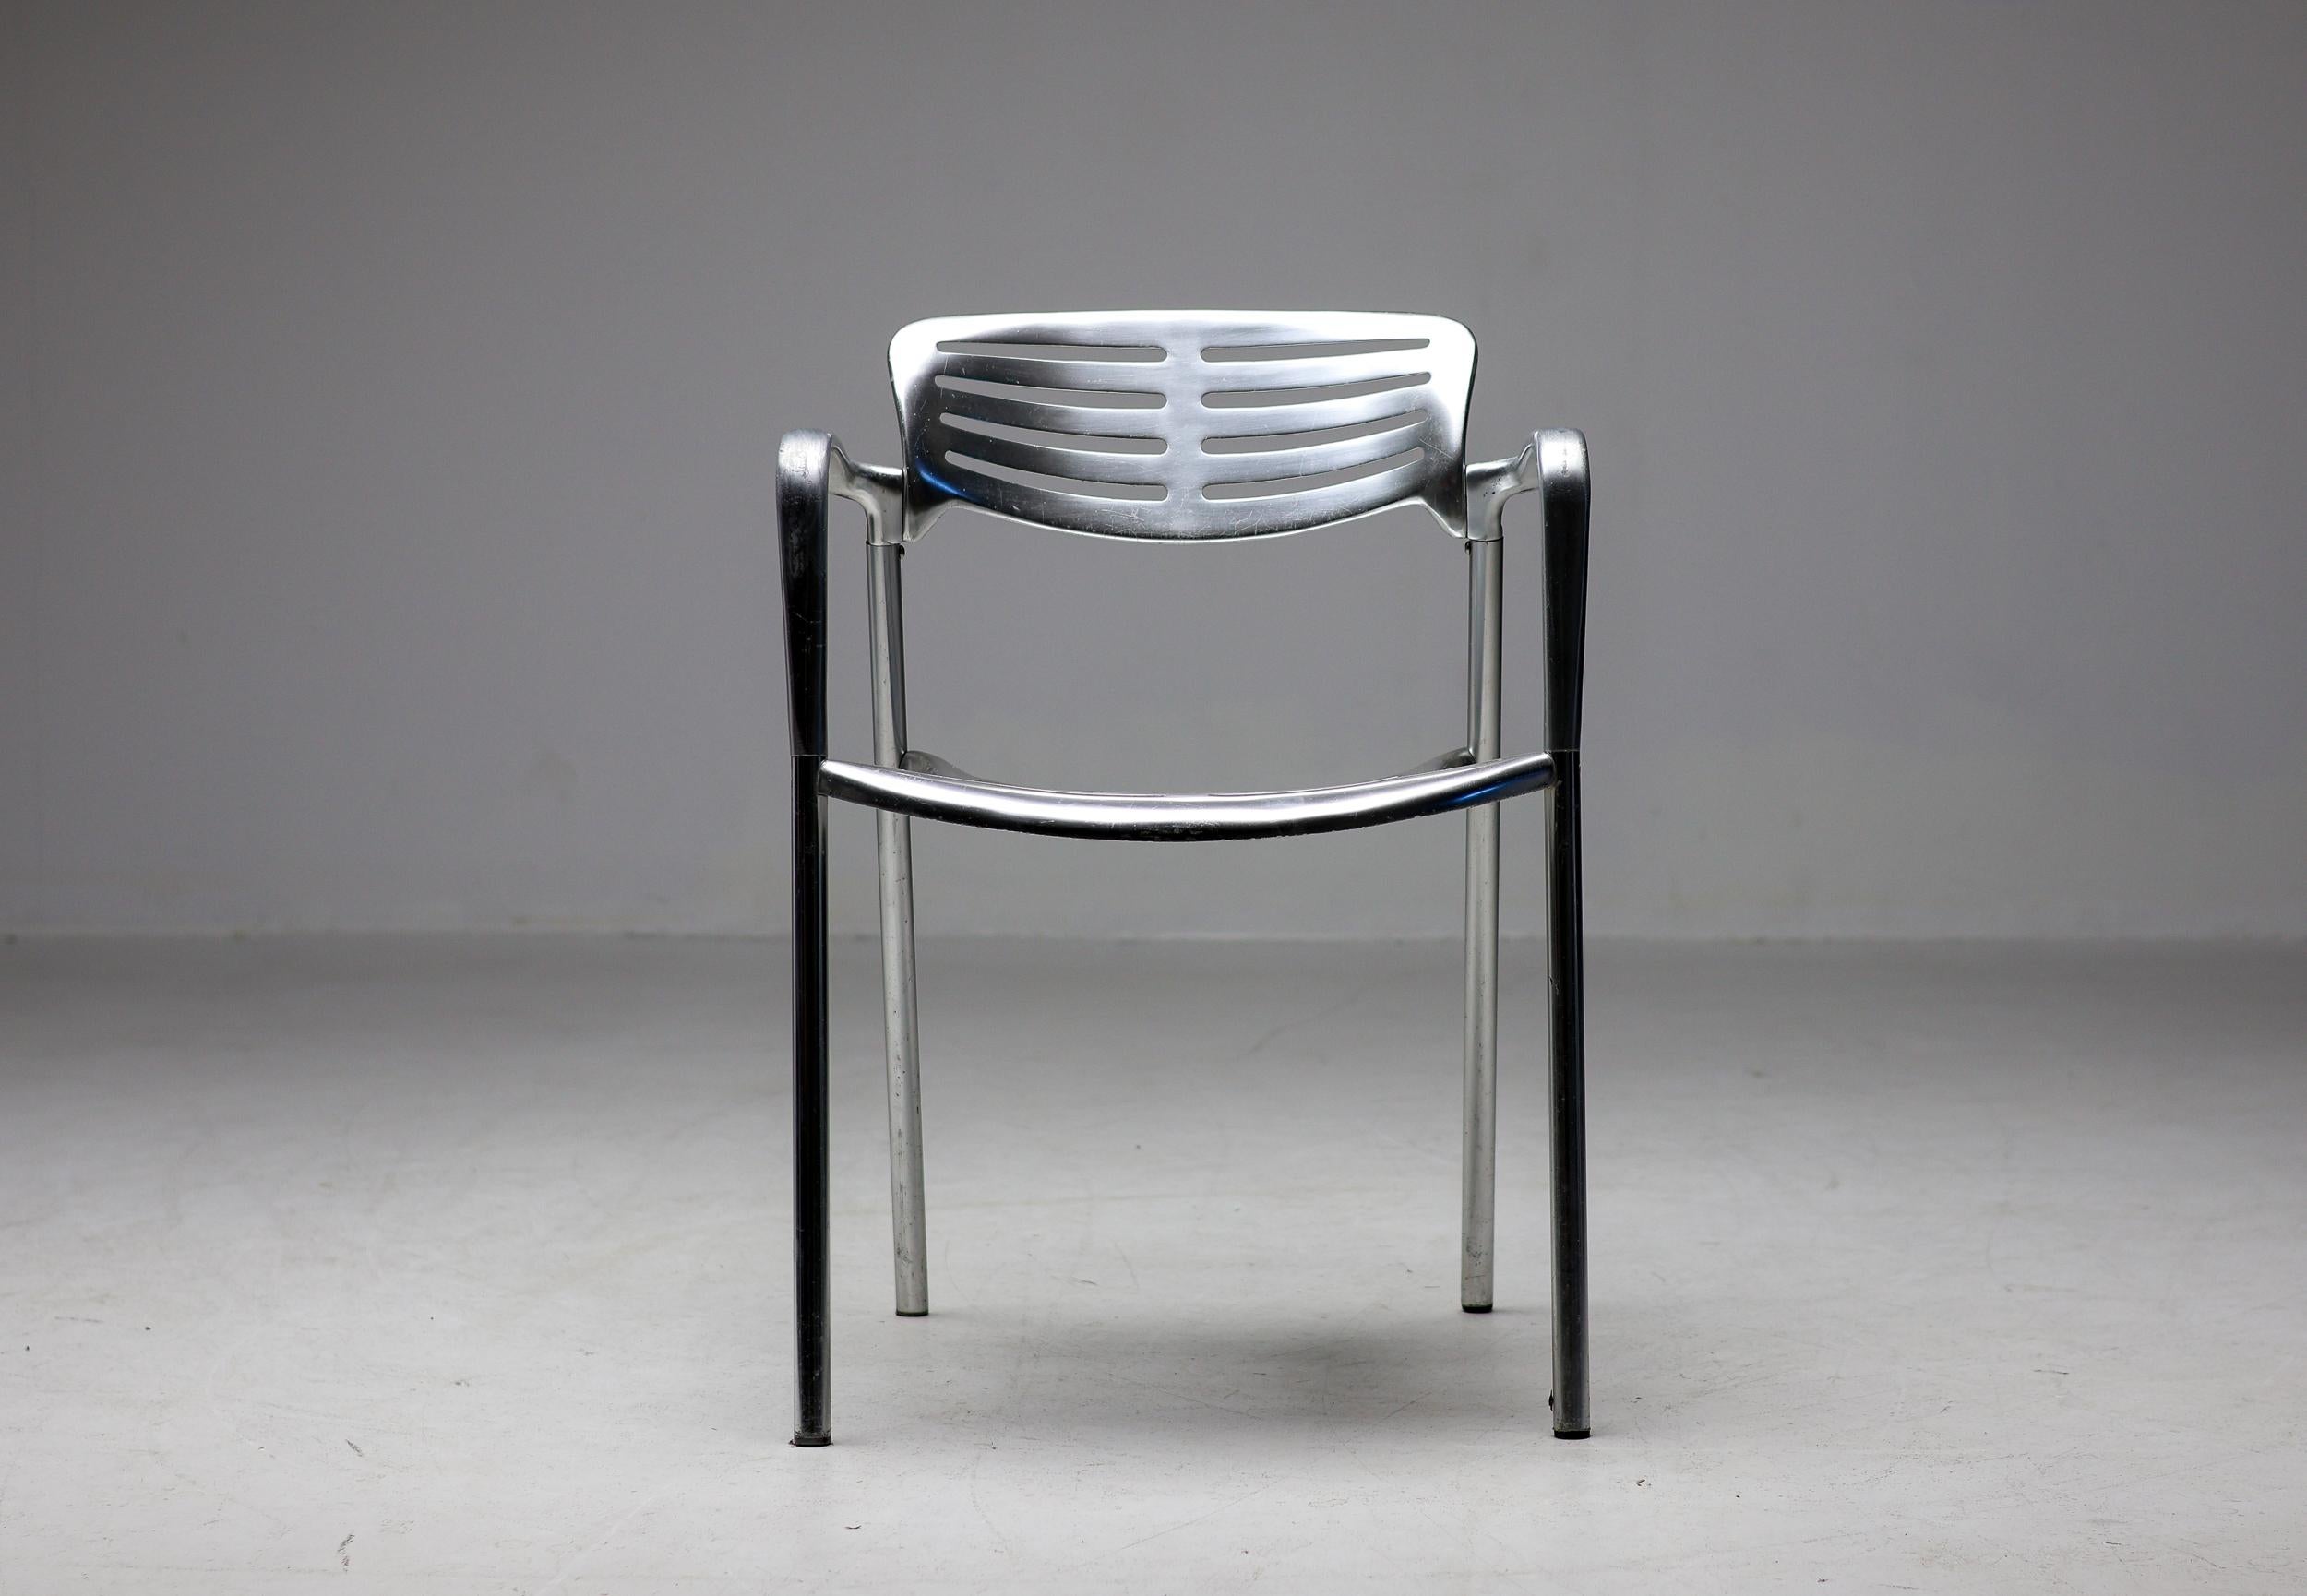 Toledo armchairs designed by Jorge Pensi, aluminum, Spain, 1988.  
Pensi designed the 'Toledo' chairs and the 'Toledo' table for the manufacturer Amat in Spain. Later the designs were adopted by Knoll International. The 'Toledo' chair features a